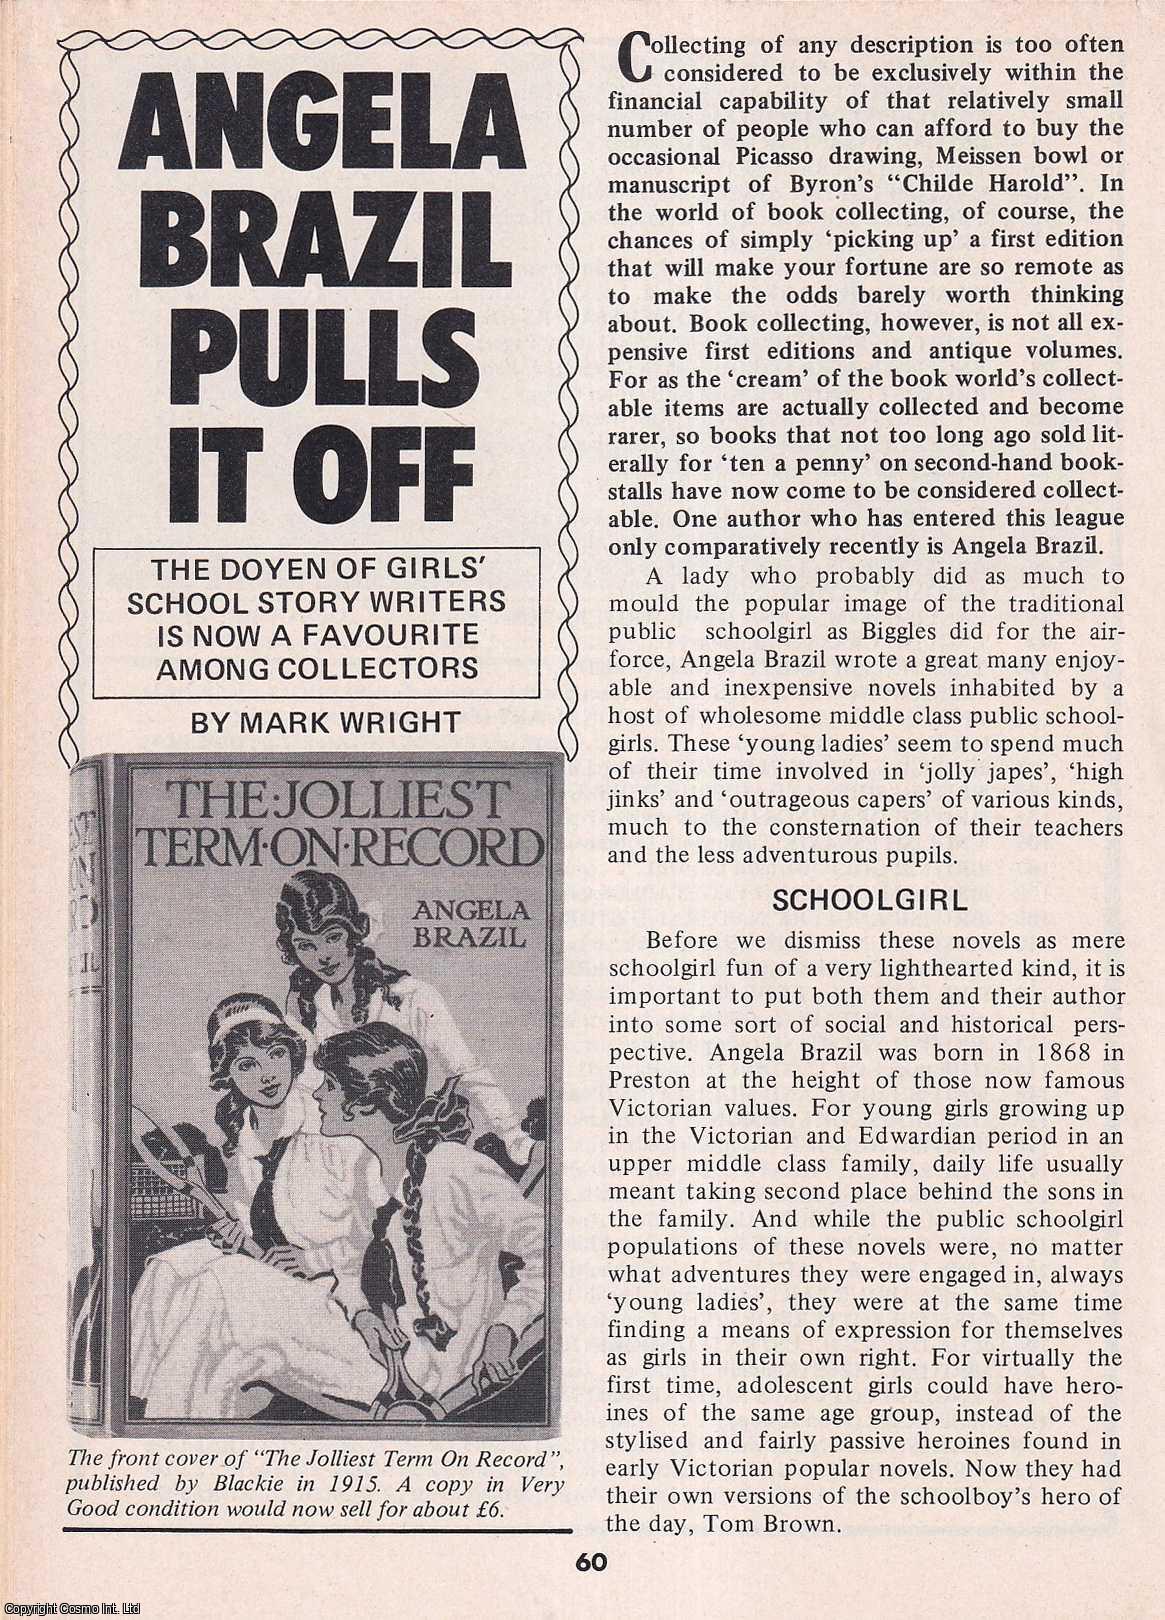 Mark Wright - Angela Brazil Pulls it off. Girls School Story Writers. This is an original article separated from an issue of The Book & Magazine Collector publication.